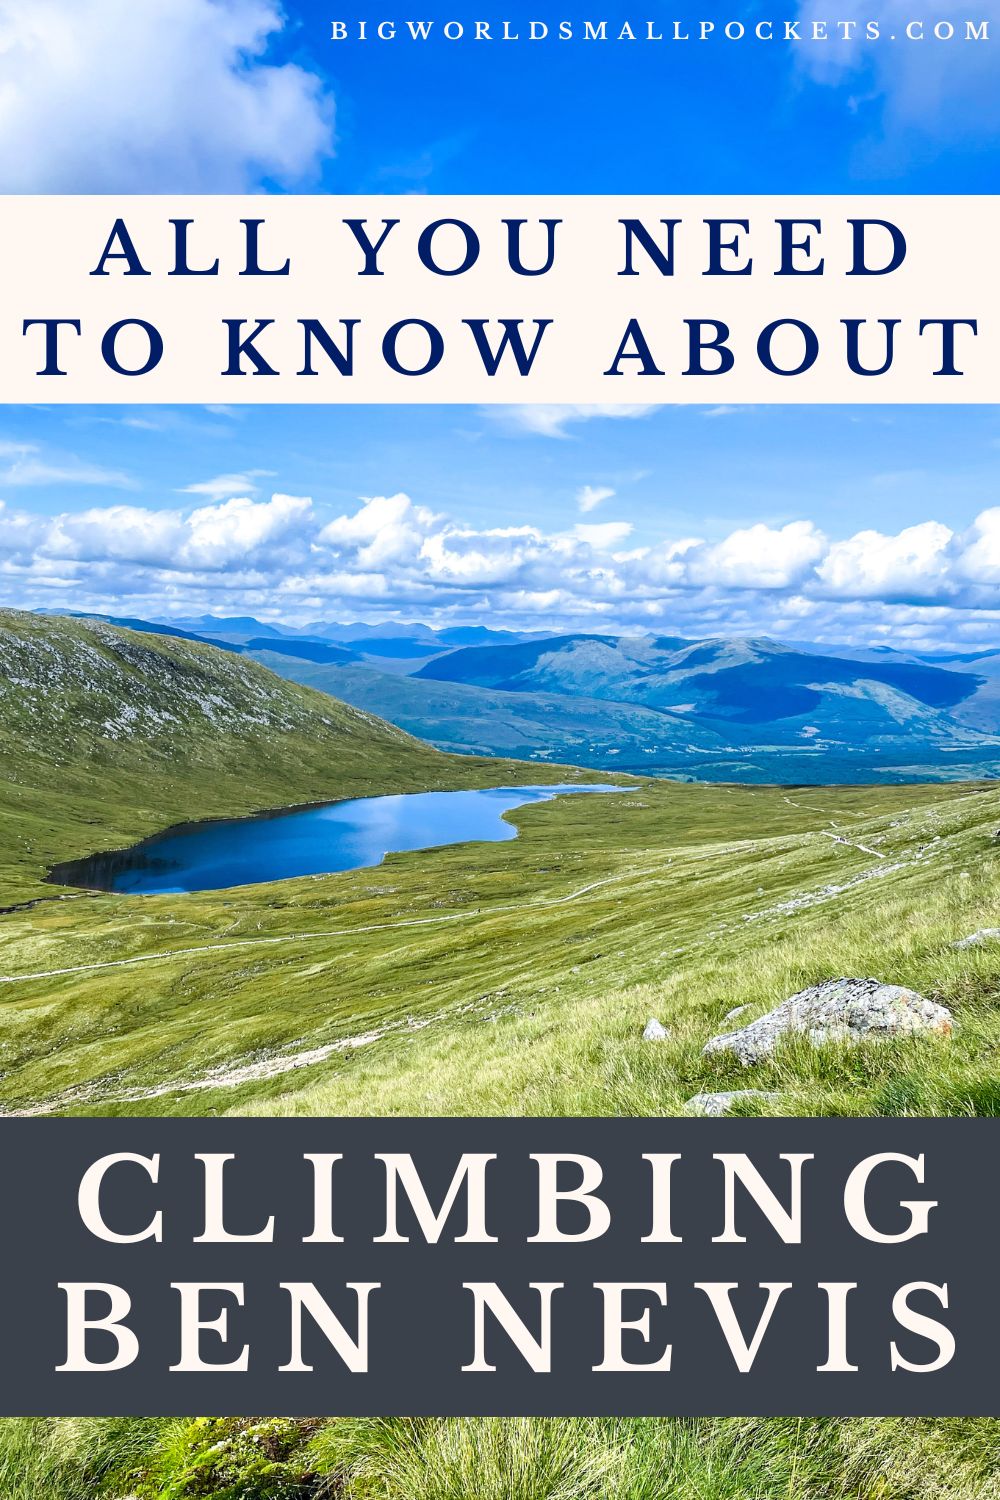 Everything You Need to Know About Climbing Ben Nevis, Scotland